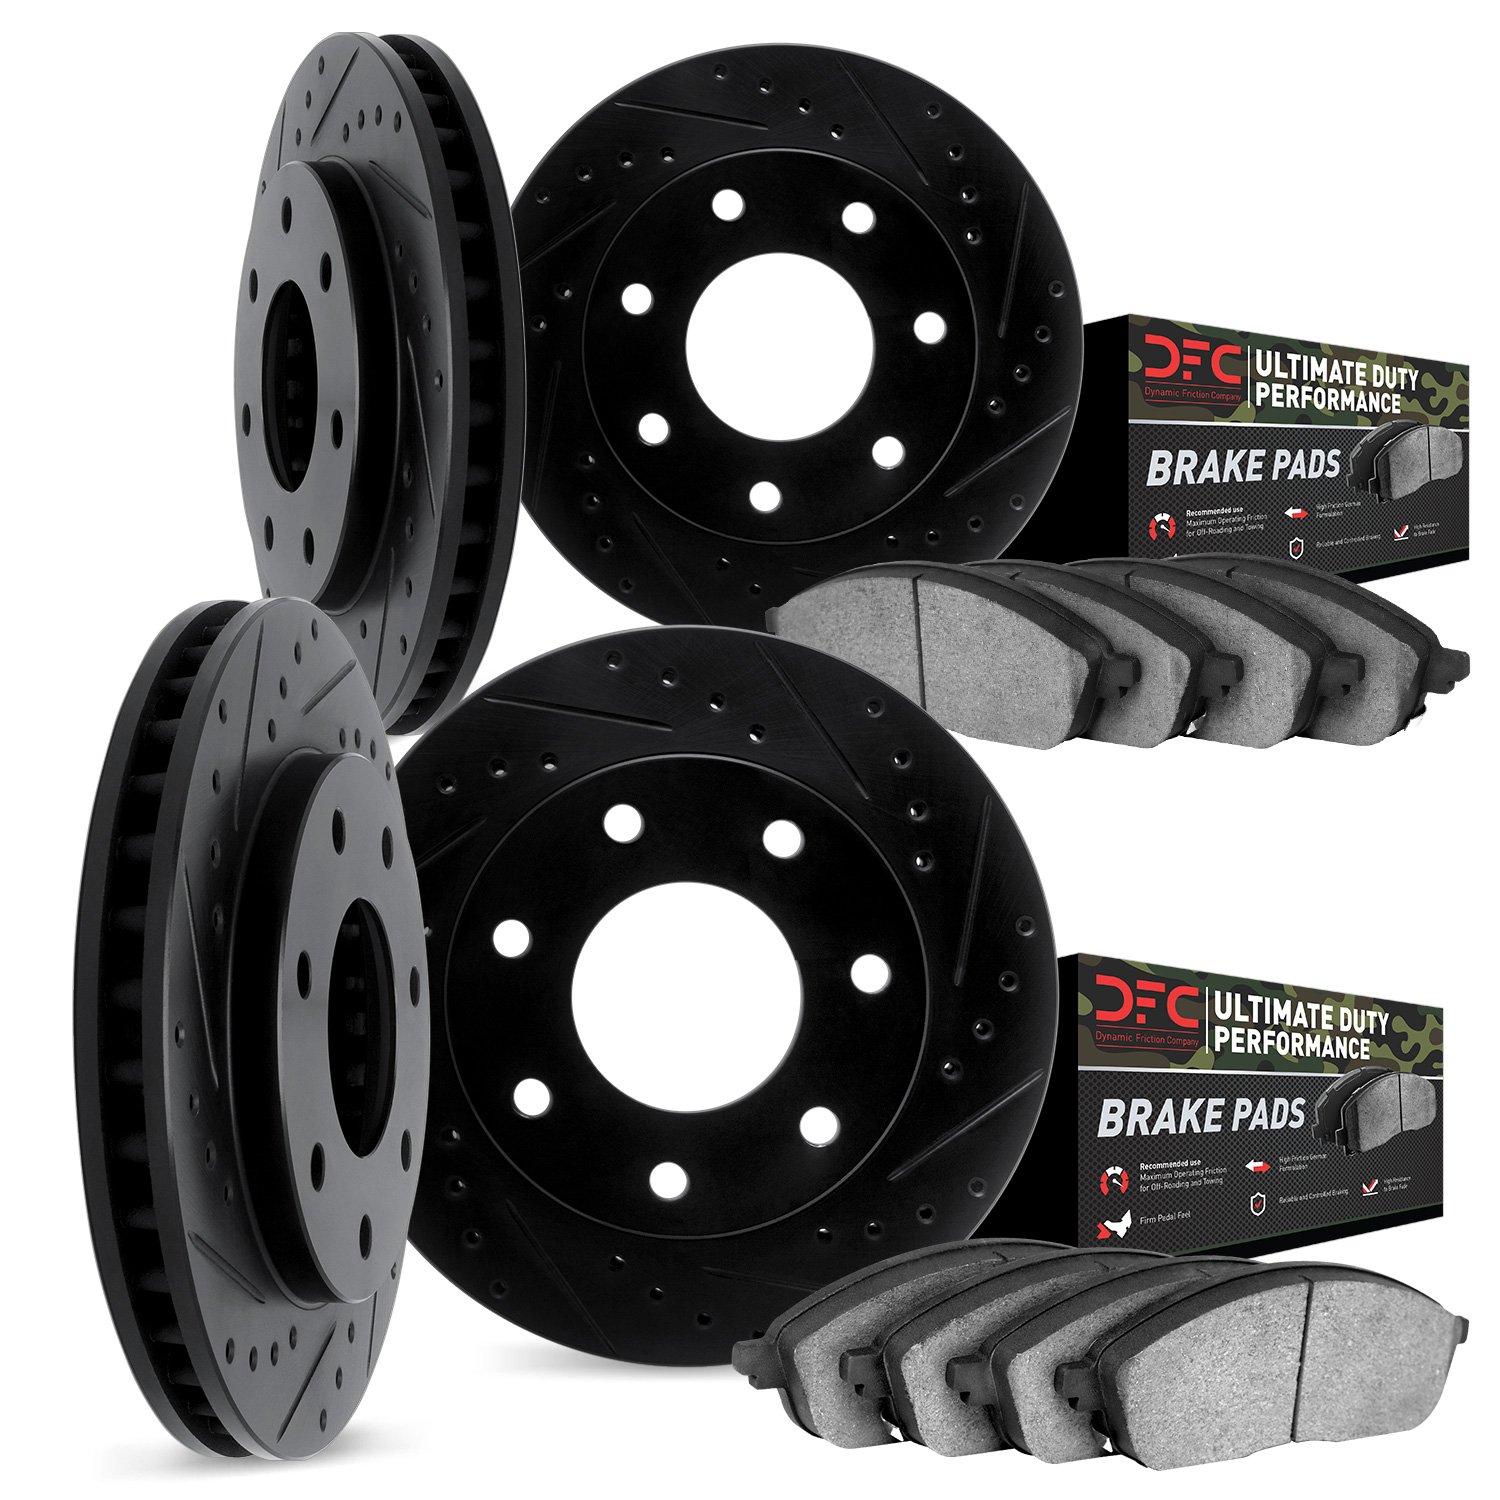 8404-54032 Drilled/Slotted Brake Rotors with Ultimate-Duty Brake Pads Kit [Black], 2004-2008 Ford/Lincoln/Mercury/Mazda, Positio